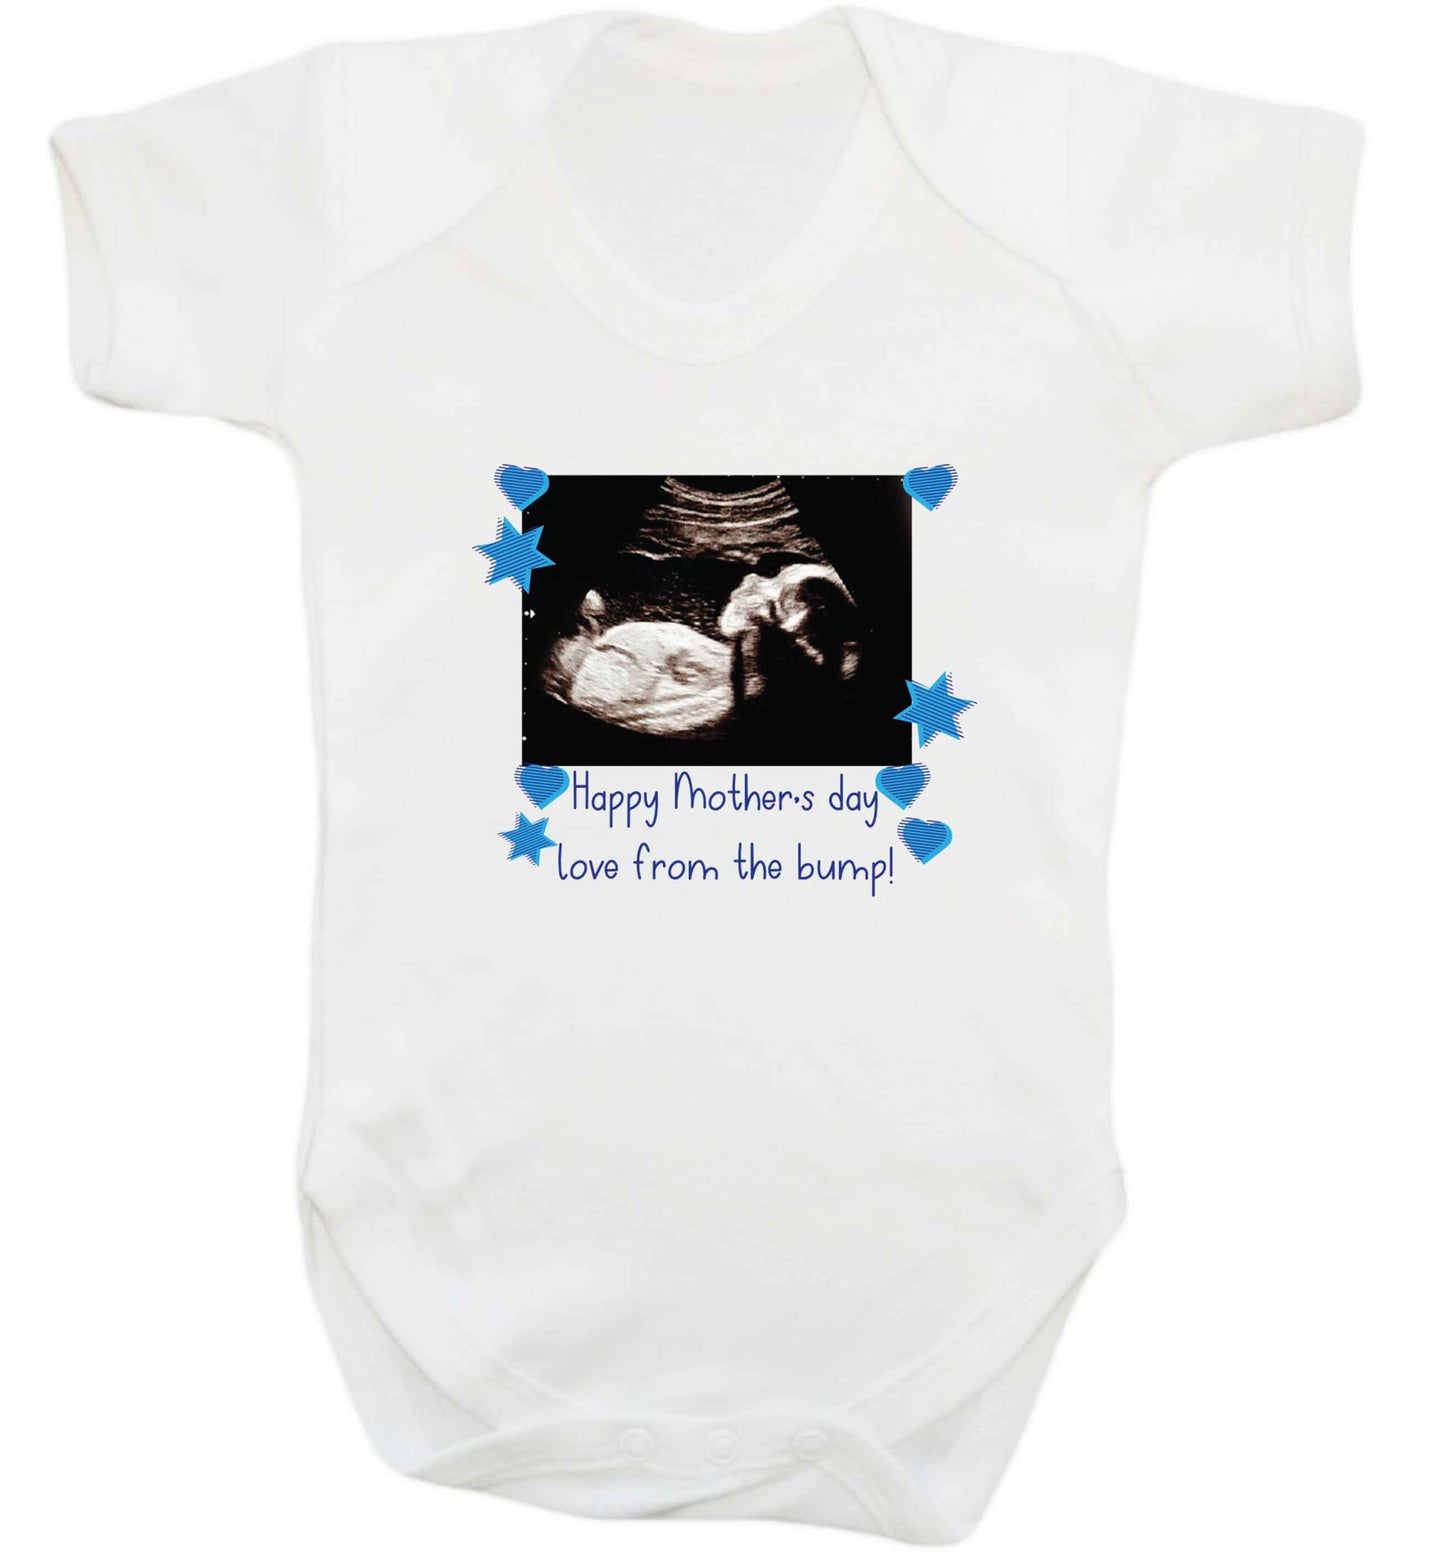 Happy Mother's day love from the bump - blue baby vest white 18-24 months